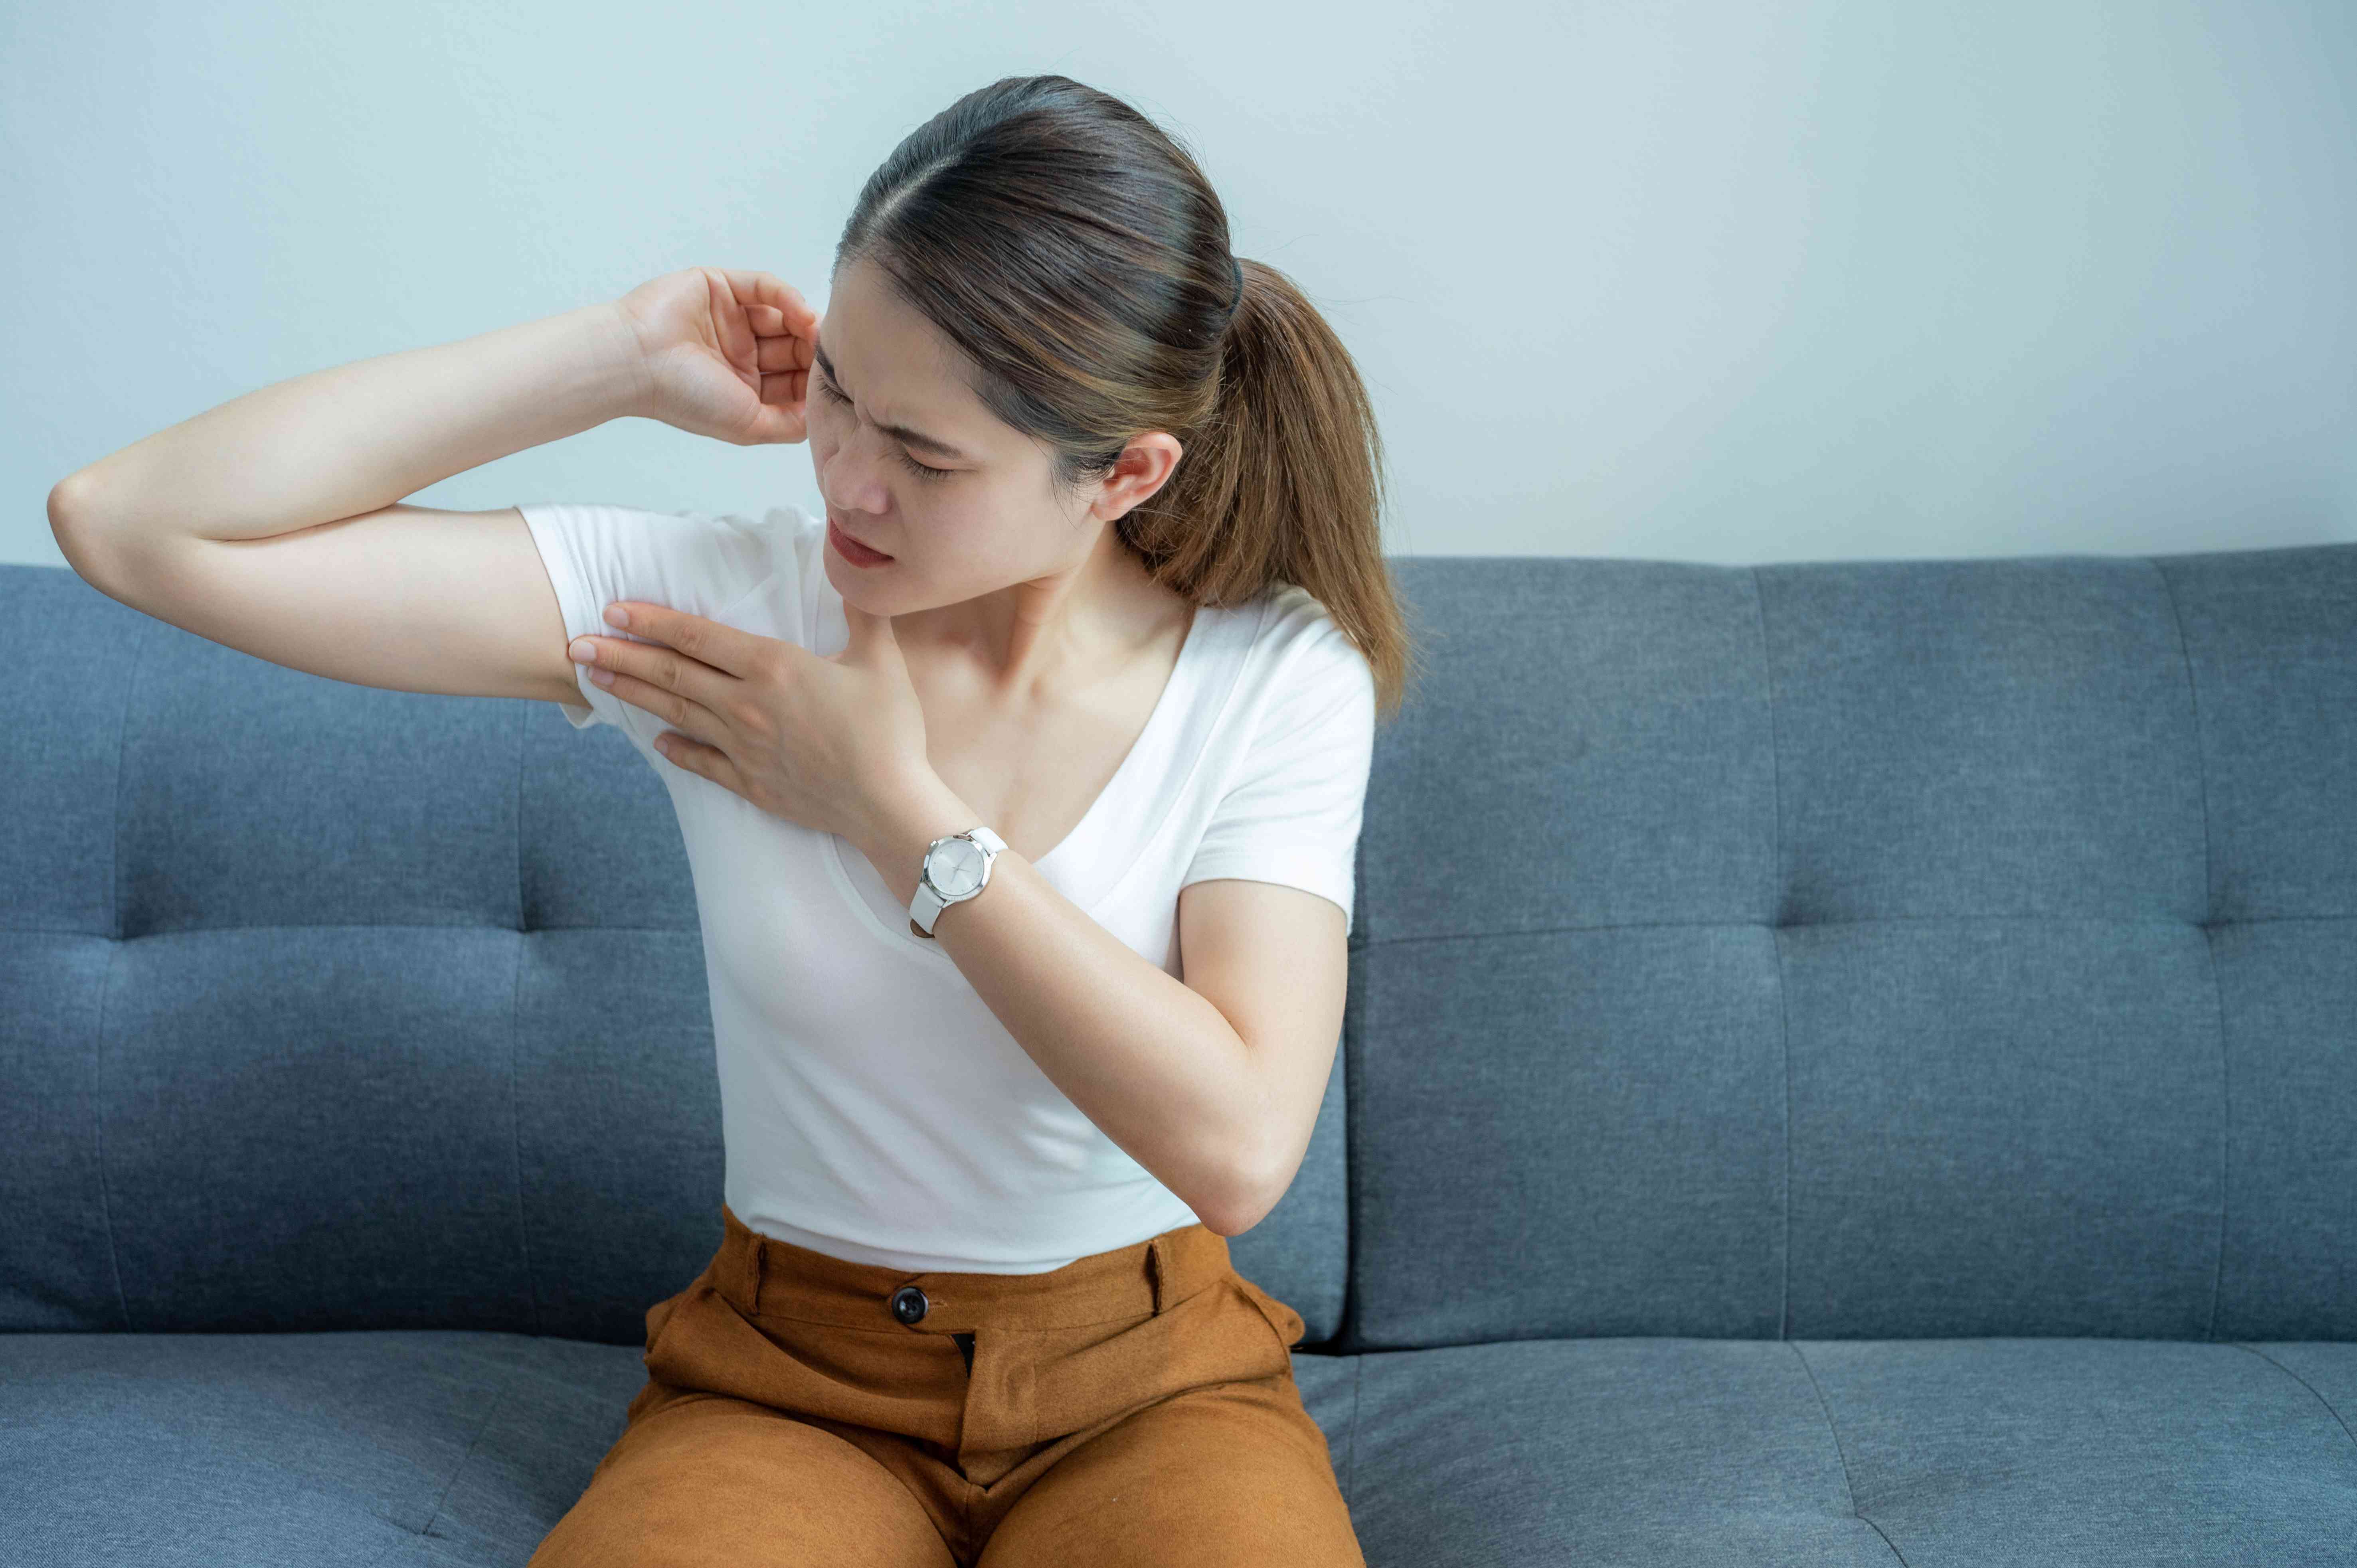 What Causes Swollen Lymph Nodes in the Armpit?